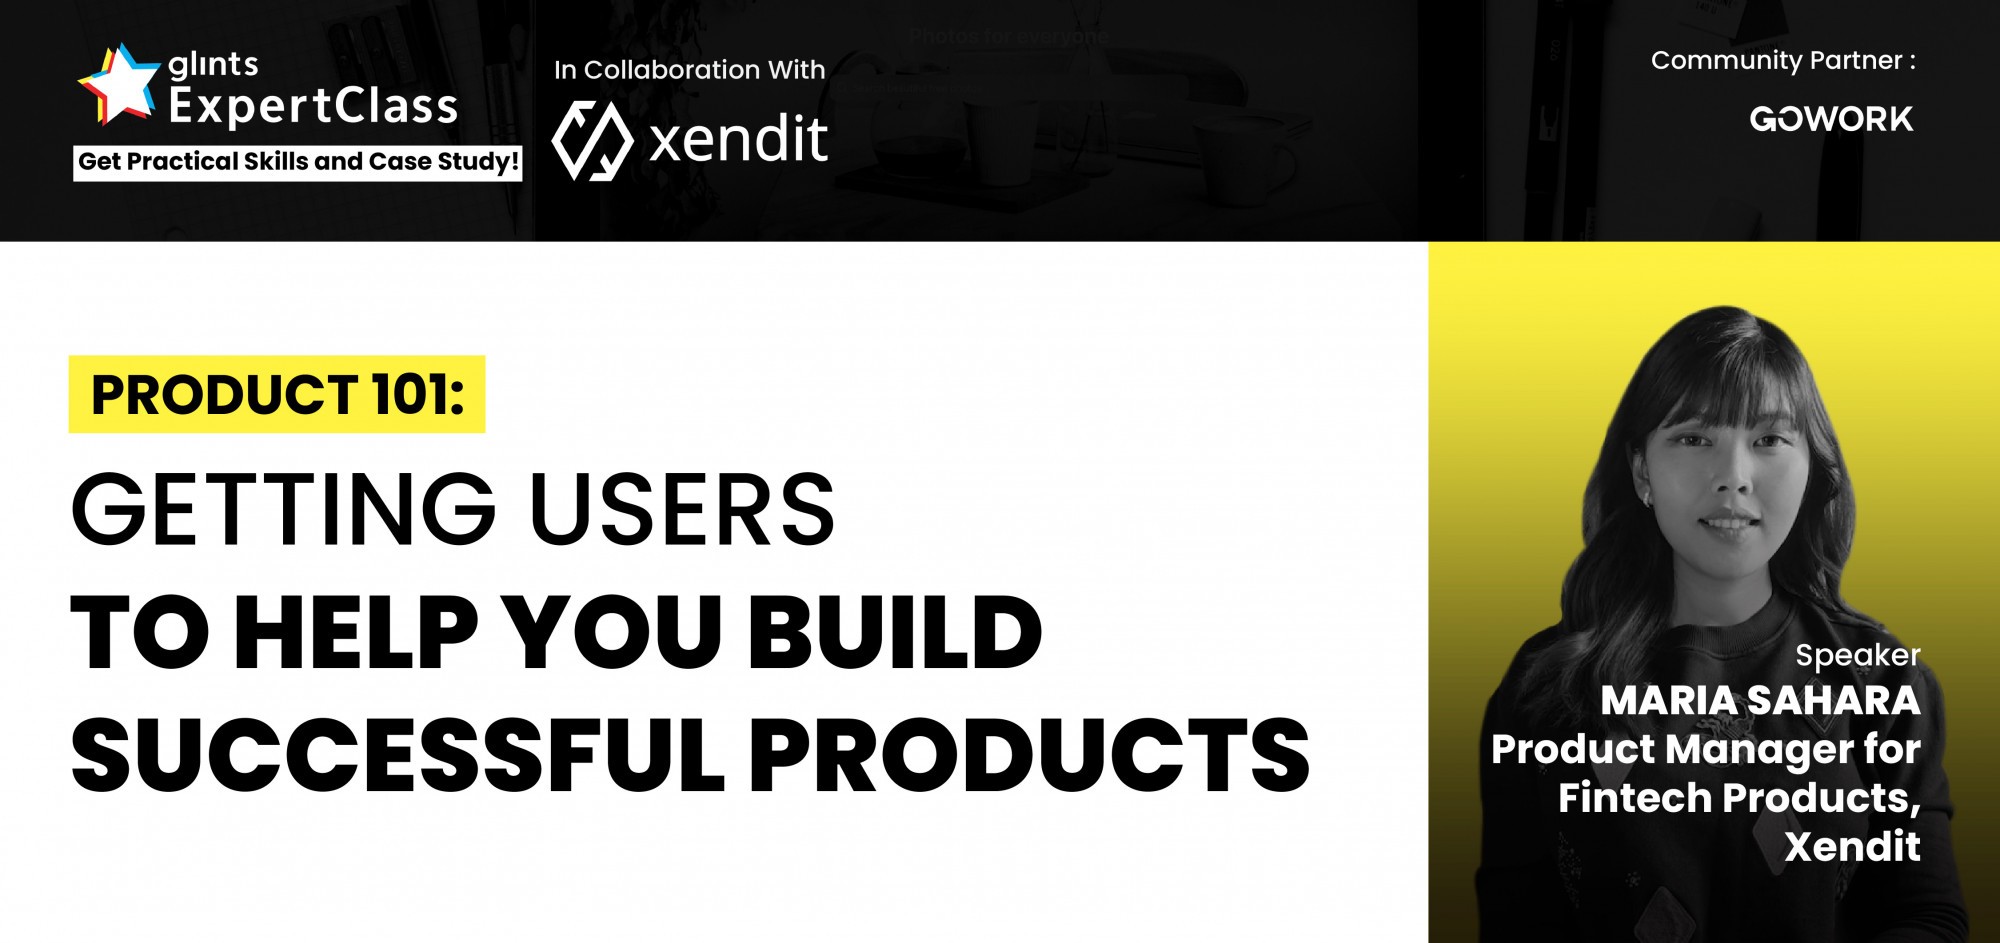 [Online Glints ExpertClass] PRODUCT 101: Getting Users to Help You Build Successful Products